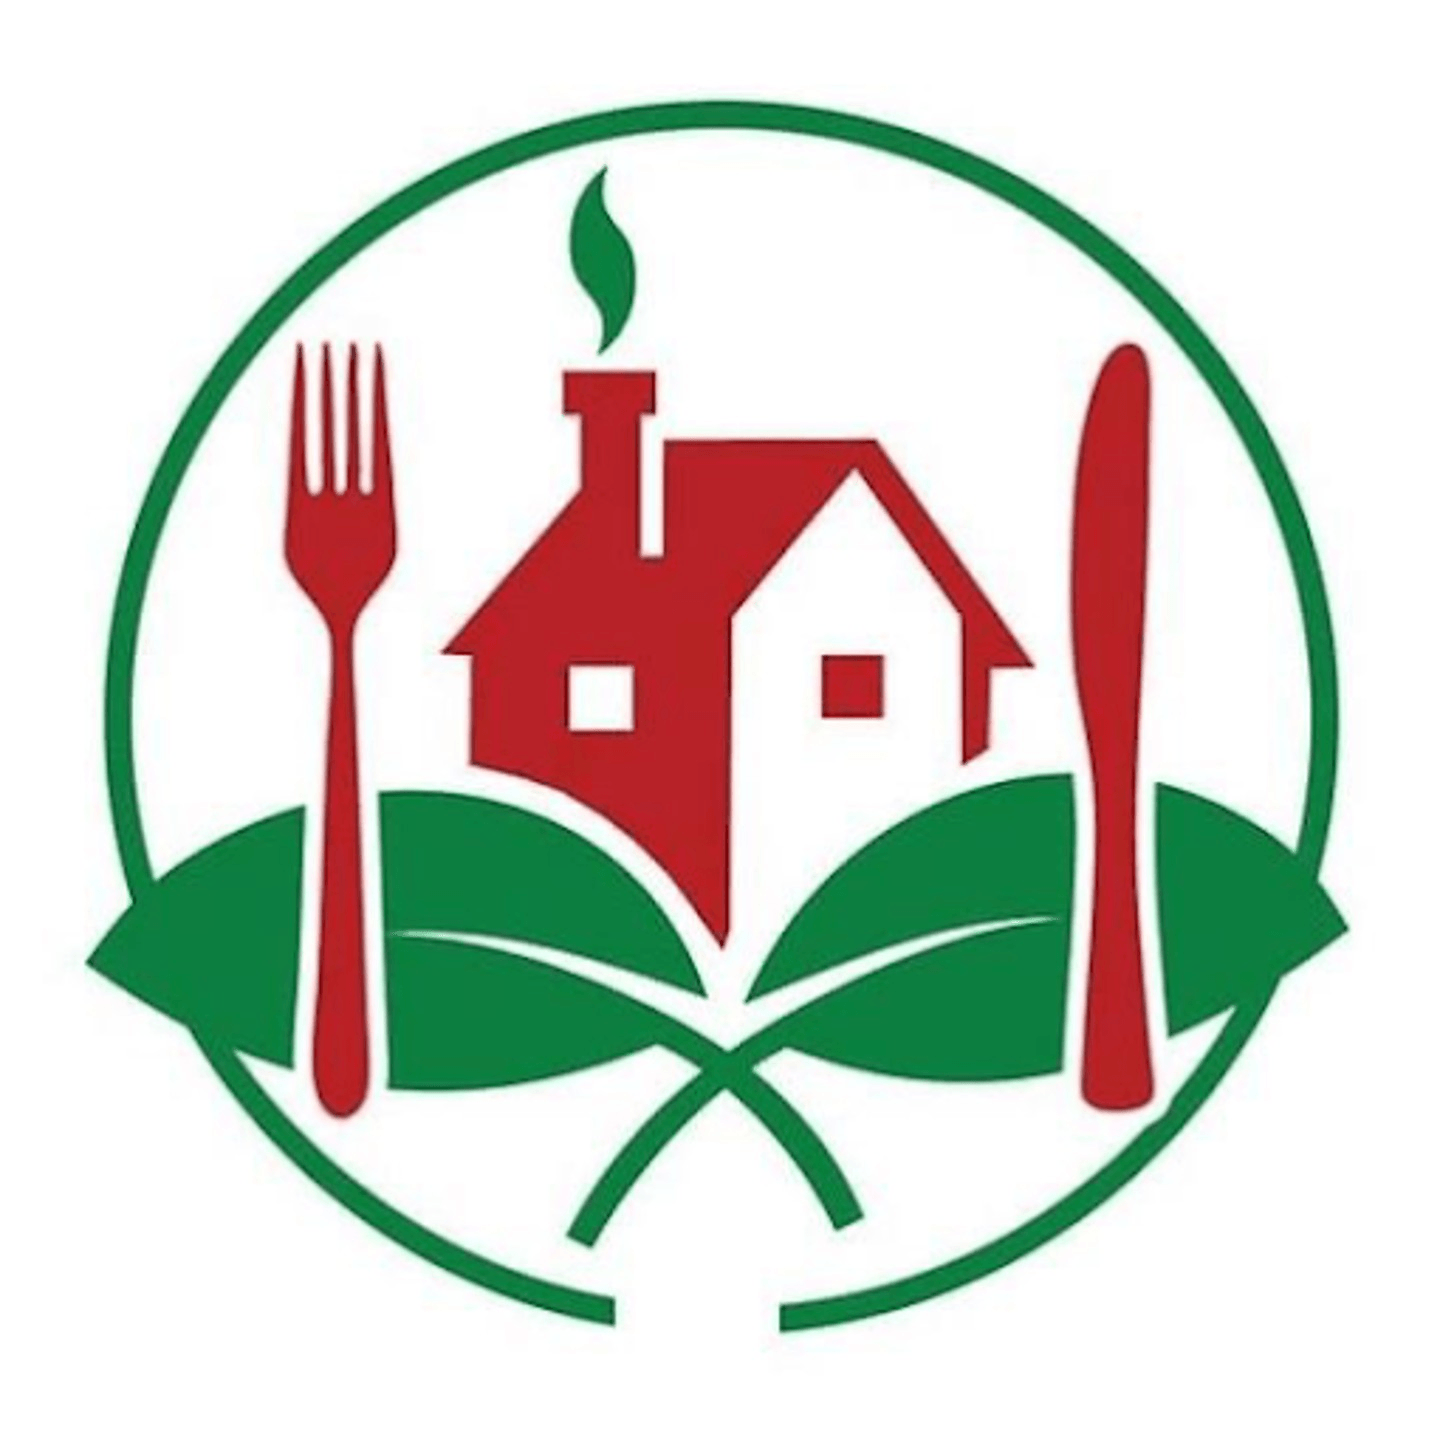 Welcome to Farmhouse Greens